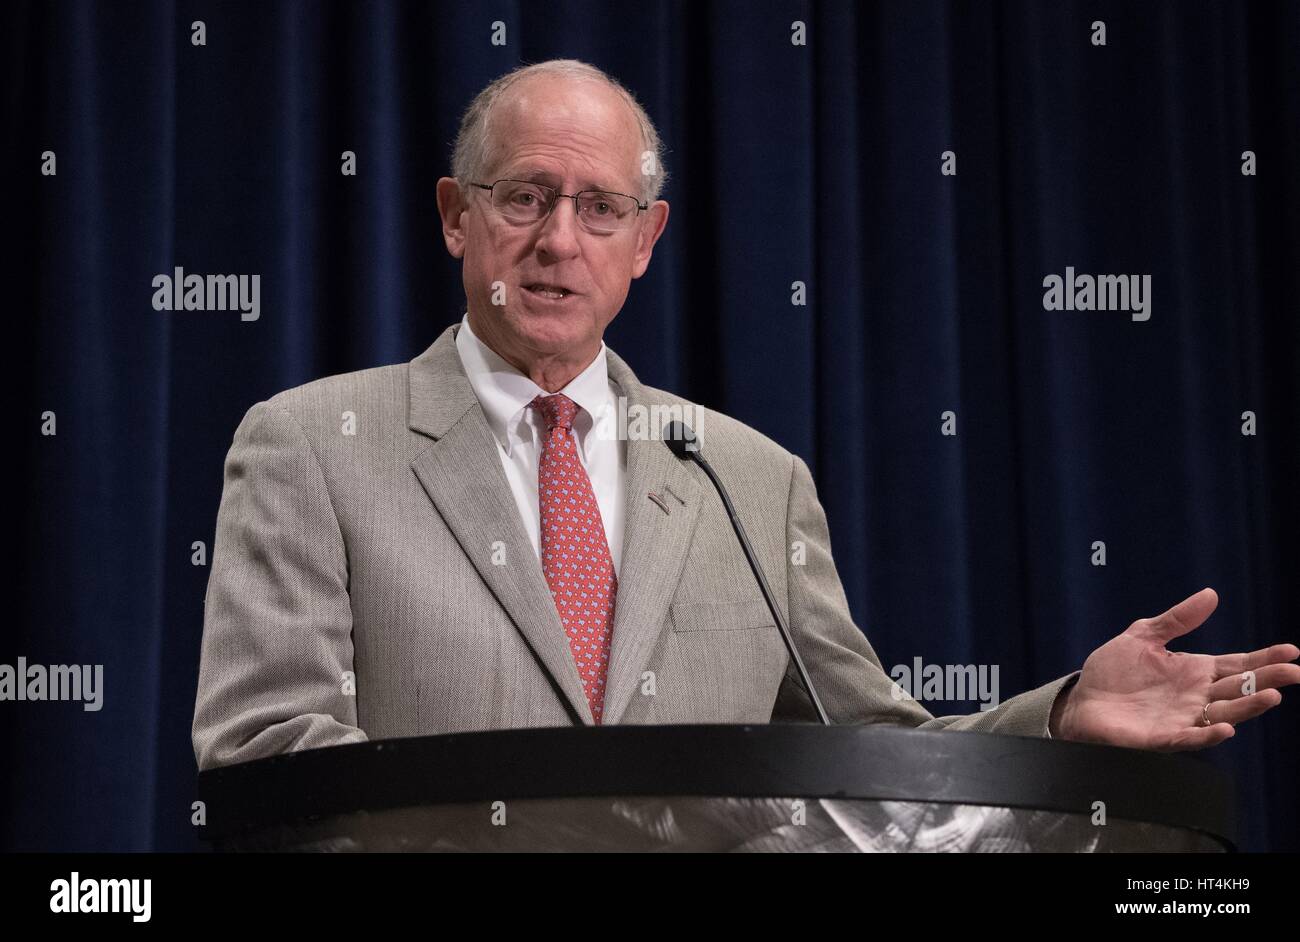 U.S. House Agriculture Committee Chairman and Texas Congressman Mike Conaway speaks during the U.S. Department of Agriculture 93rd Annual Agricultural Outlook Forum at the Crystal Gateway Marriott Hotel February 23, 2017 in Arlington, Virginia. Stock Photo